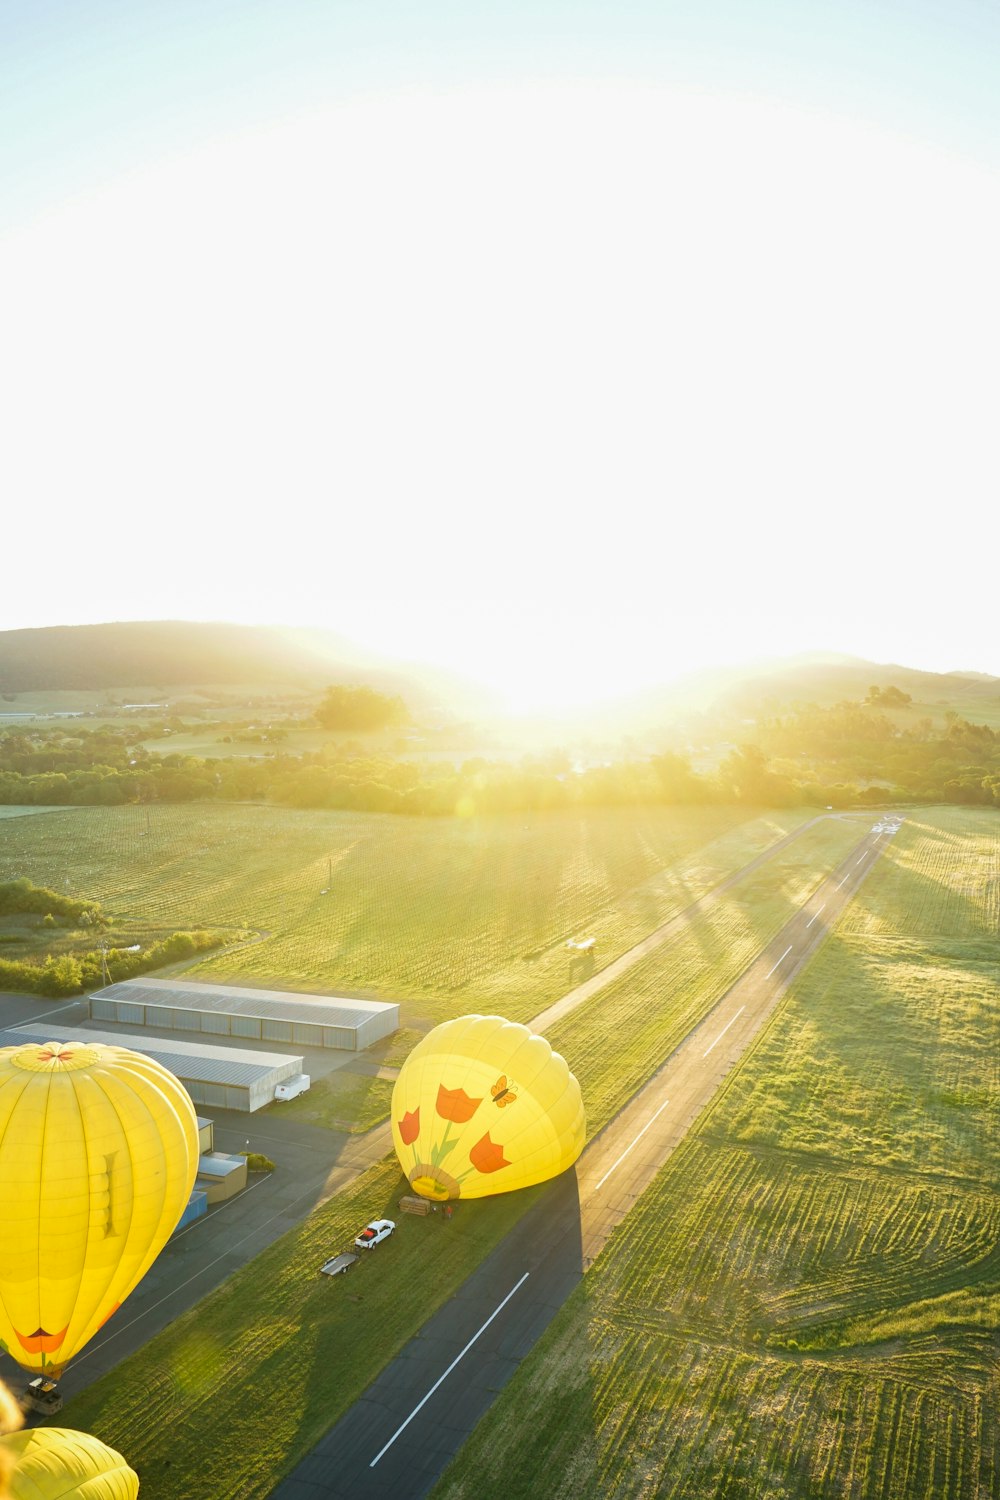 two hot air balloons on ground during daytime